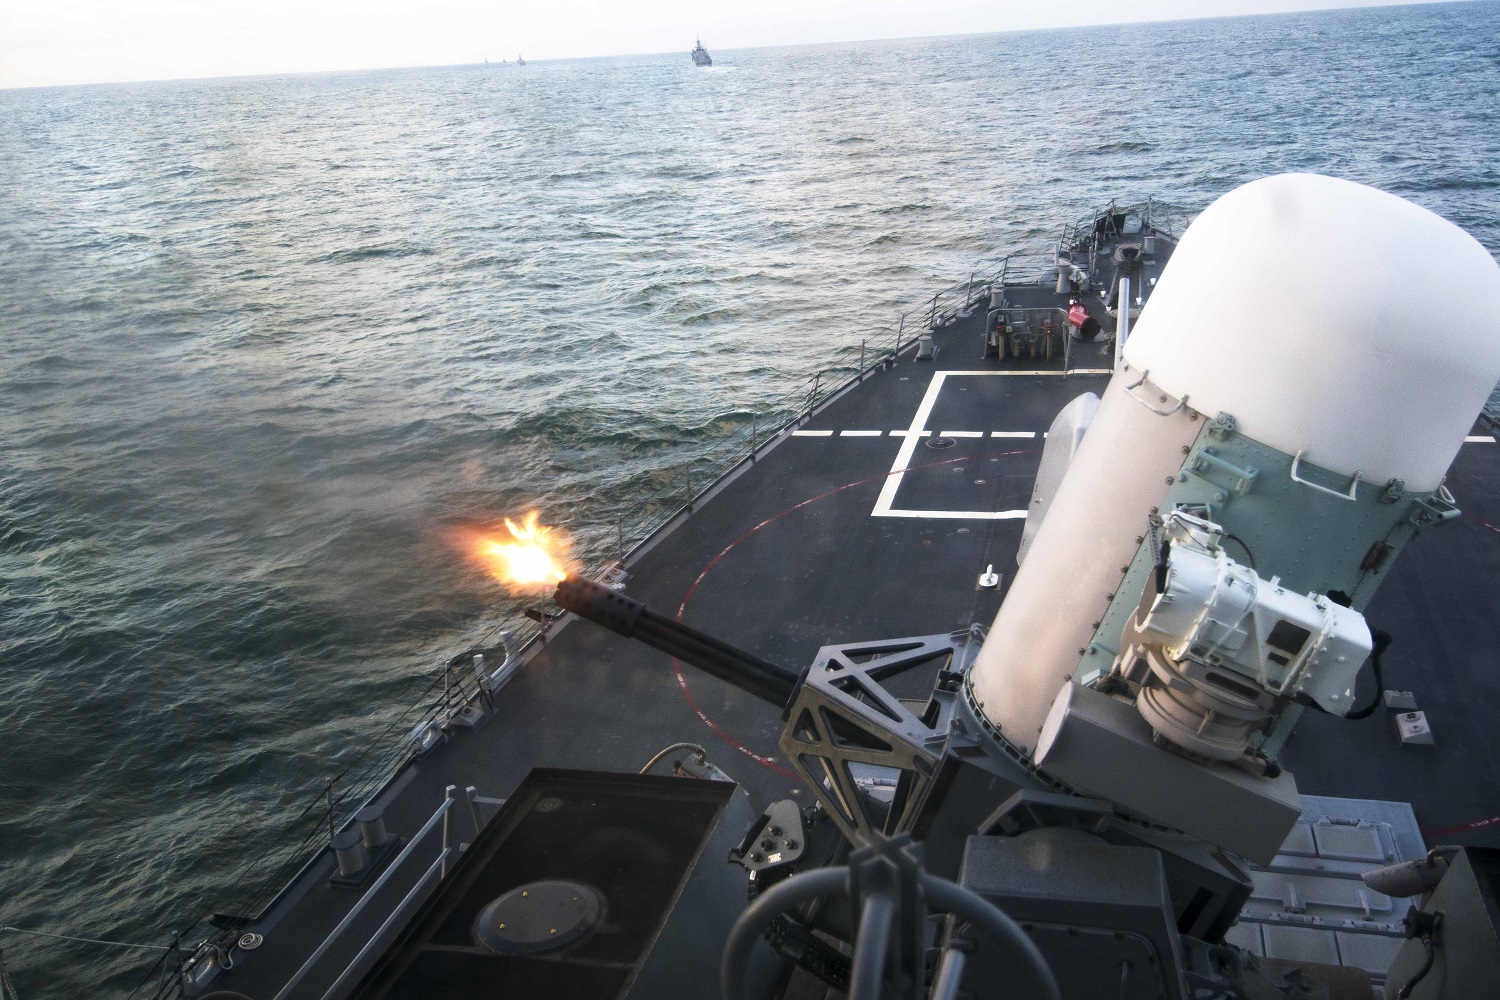 The guided-missile destroyer USS Porter (DDG 78) fires its close-in weapons system during a live-fire exercise as part of a passing exercise with allied and partner nations Bulgaria, Romania, Turkey and Ukraine in the Black Sea. Porter is on a routine patrol conducting naval operations in the U.S. 6th Fleet area of operations in support of U.S. national security interests in Europe. U.S. Navy photo by Mass Communication Specialist 1st Class Sean Spratt  